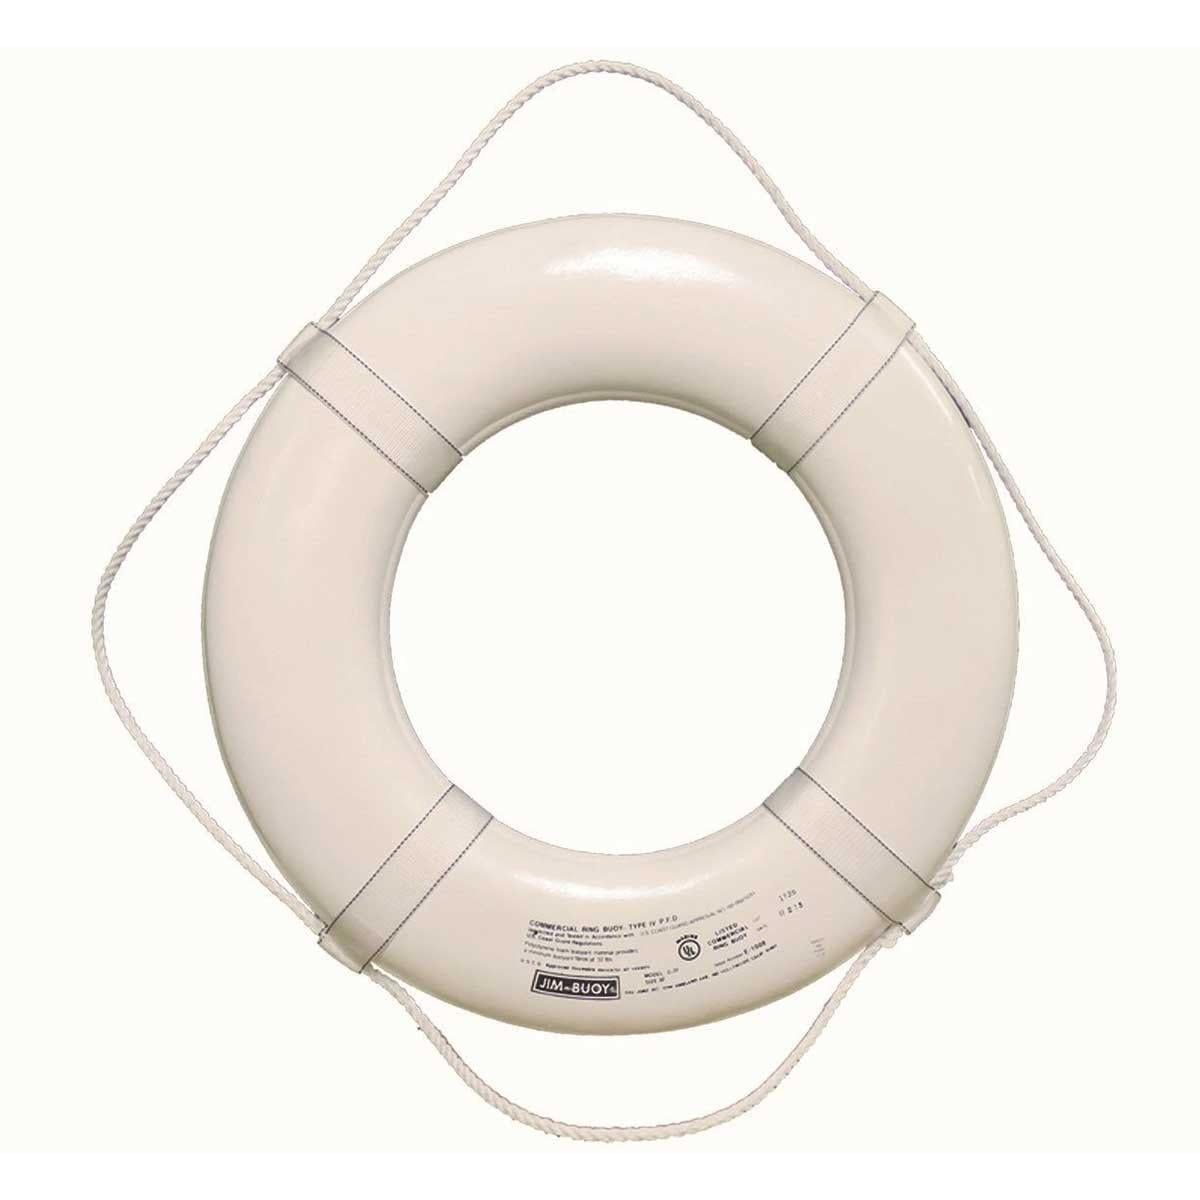 Inc Dock Edge USCGA Approved Commercial Life Ring Buoy 30 30 DE55231F